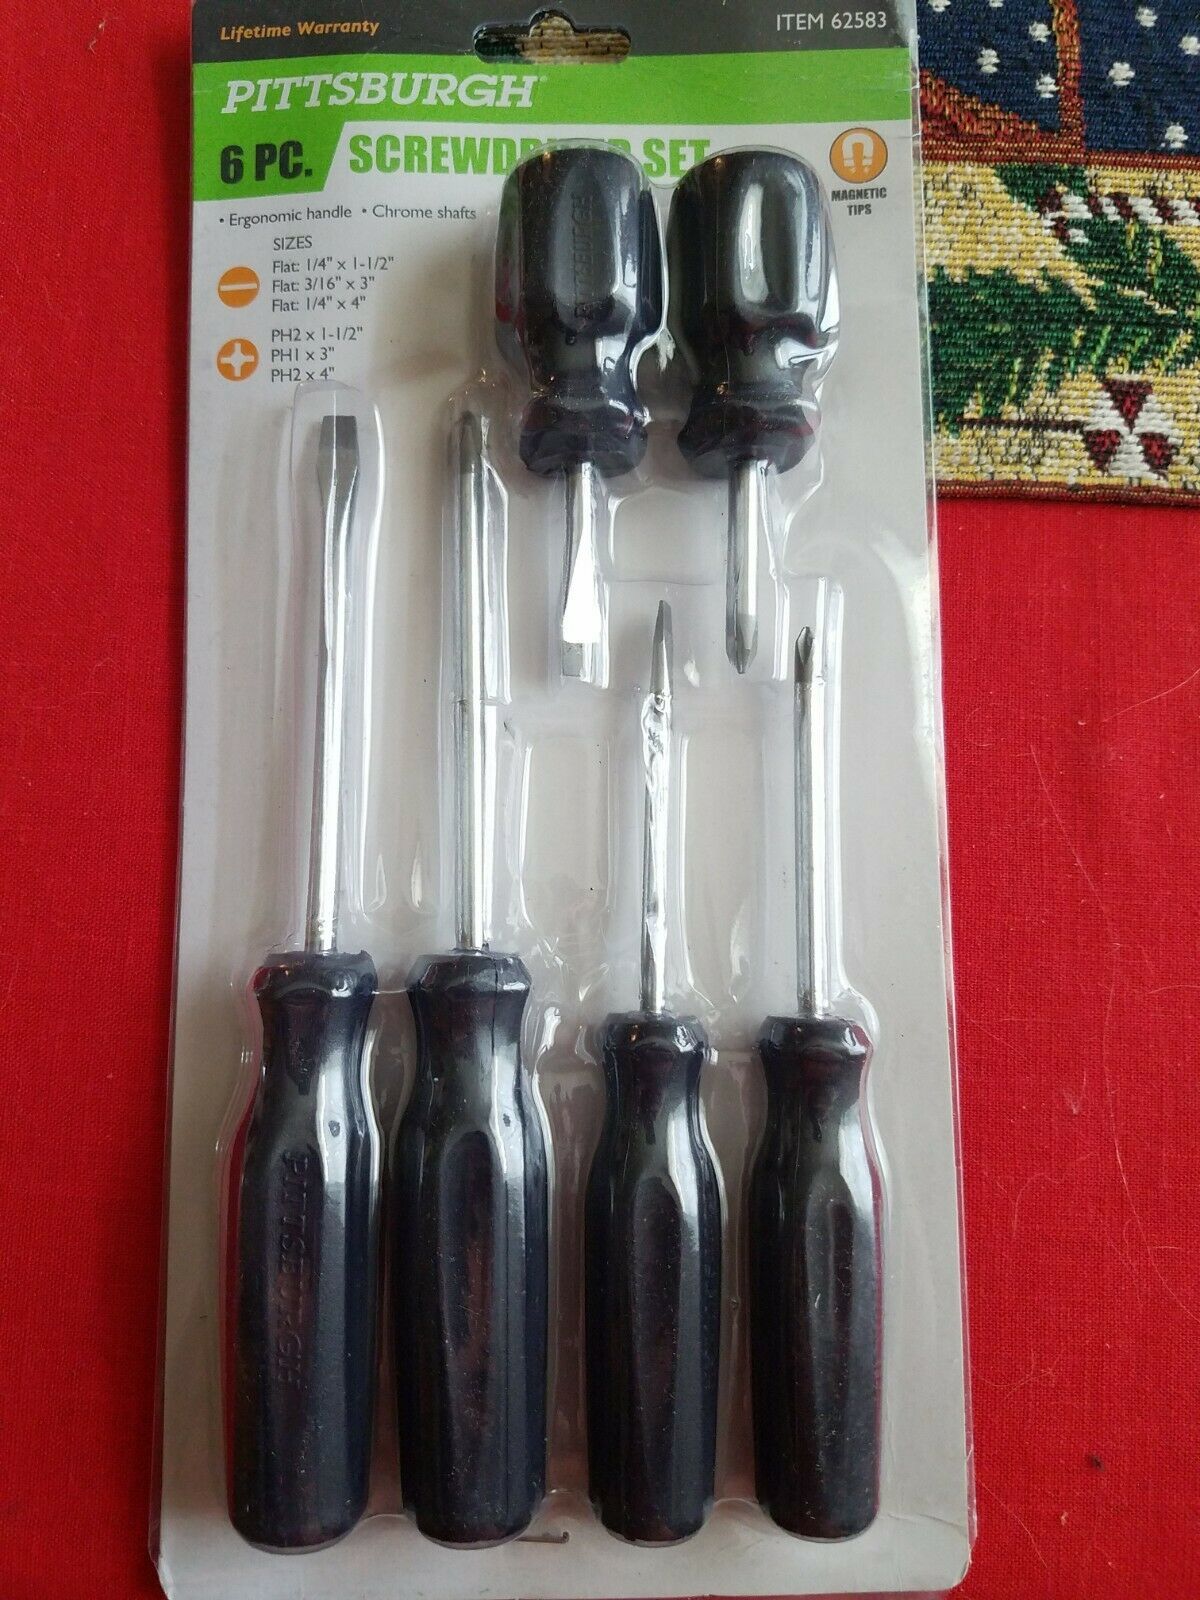 Pittsburgh 6 Piece Screwdriver Set #62583 Magnetic Tips NEW - $16.99